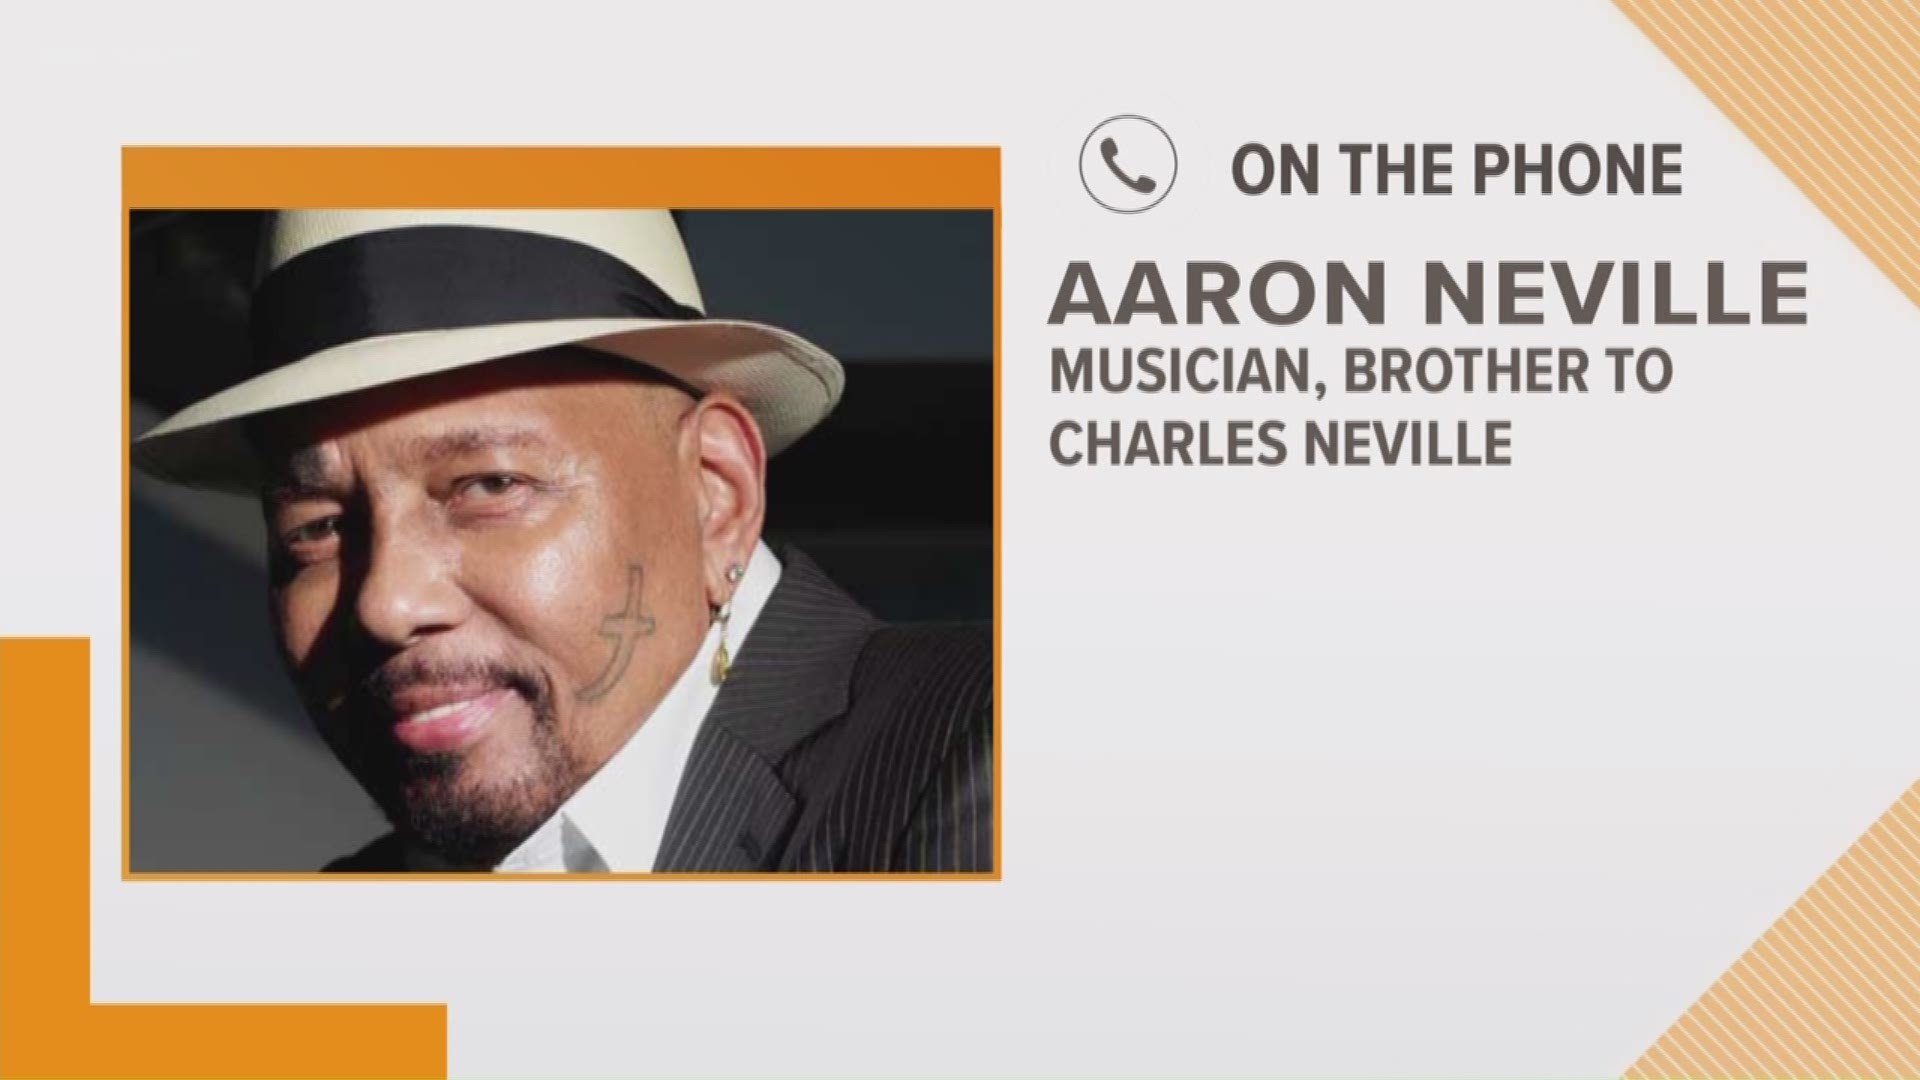 Aaron Neville remembers his brother Charles Neville